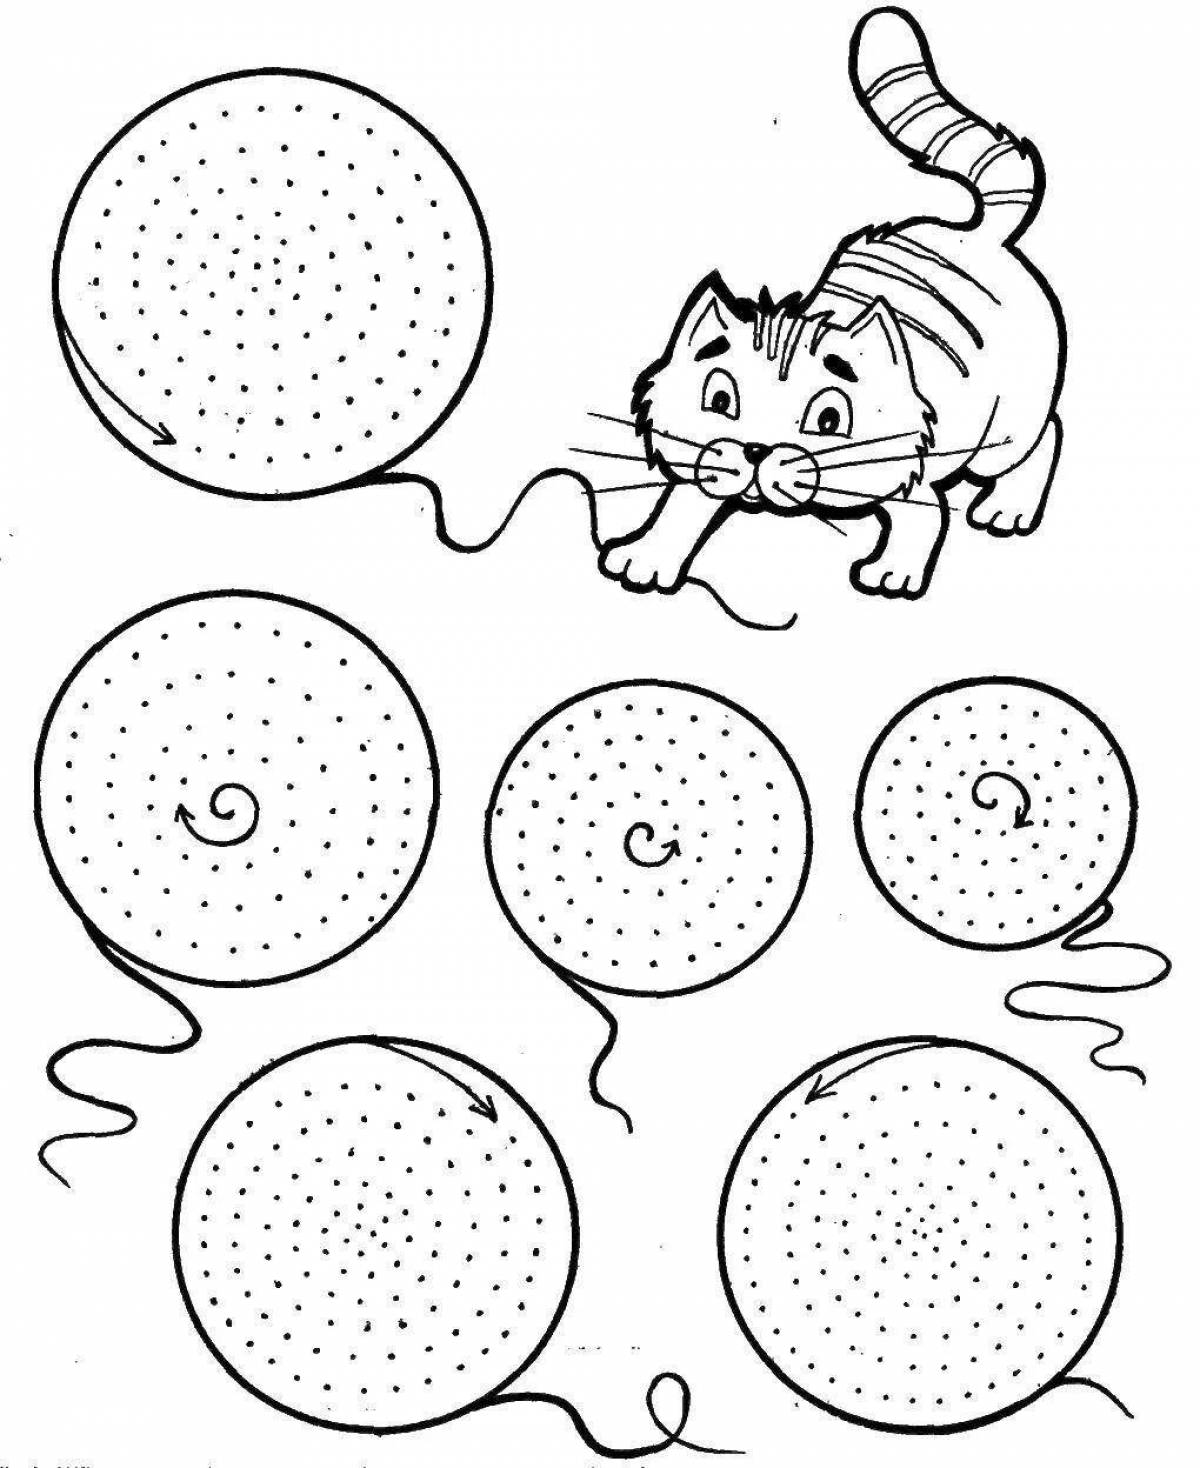 Coloring page adorable kitten with a ball